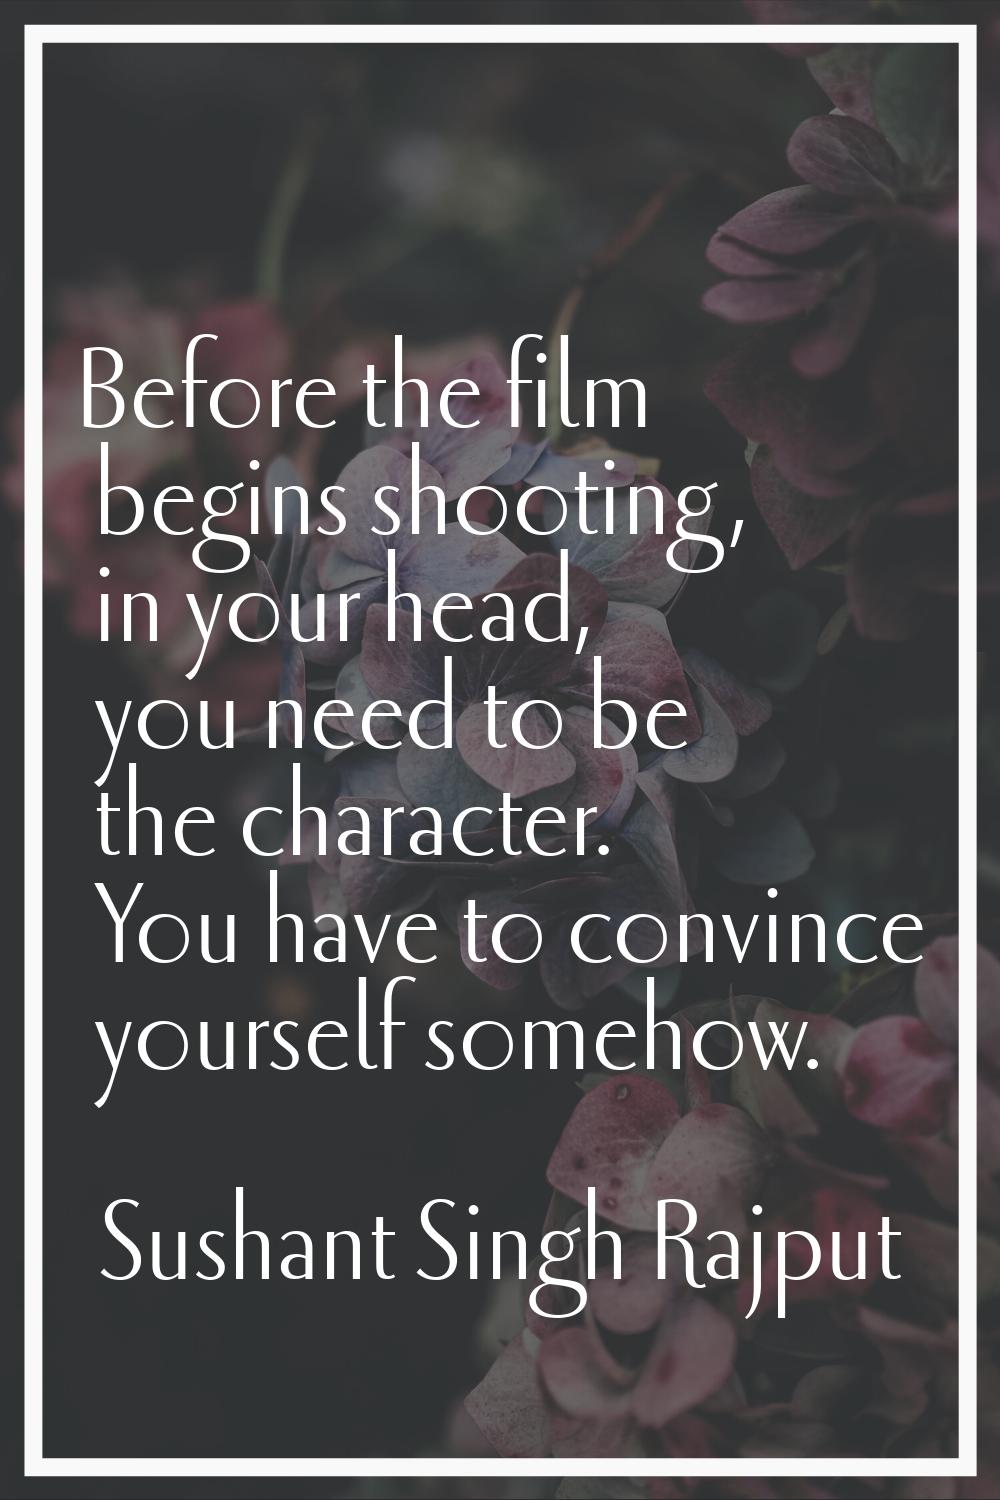 Before the film begins shooting, in your head, you need to be the character. You have to convince y